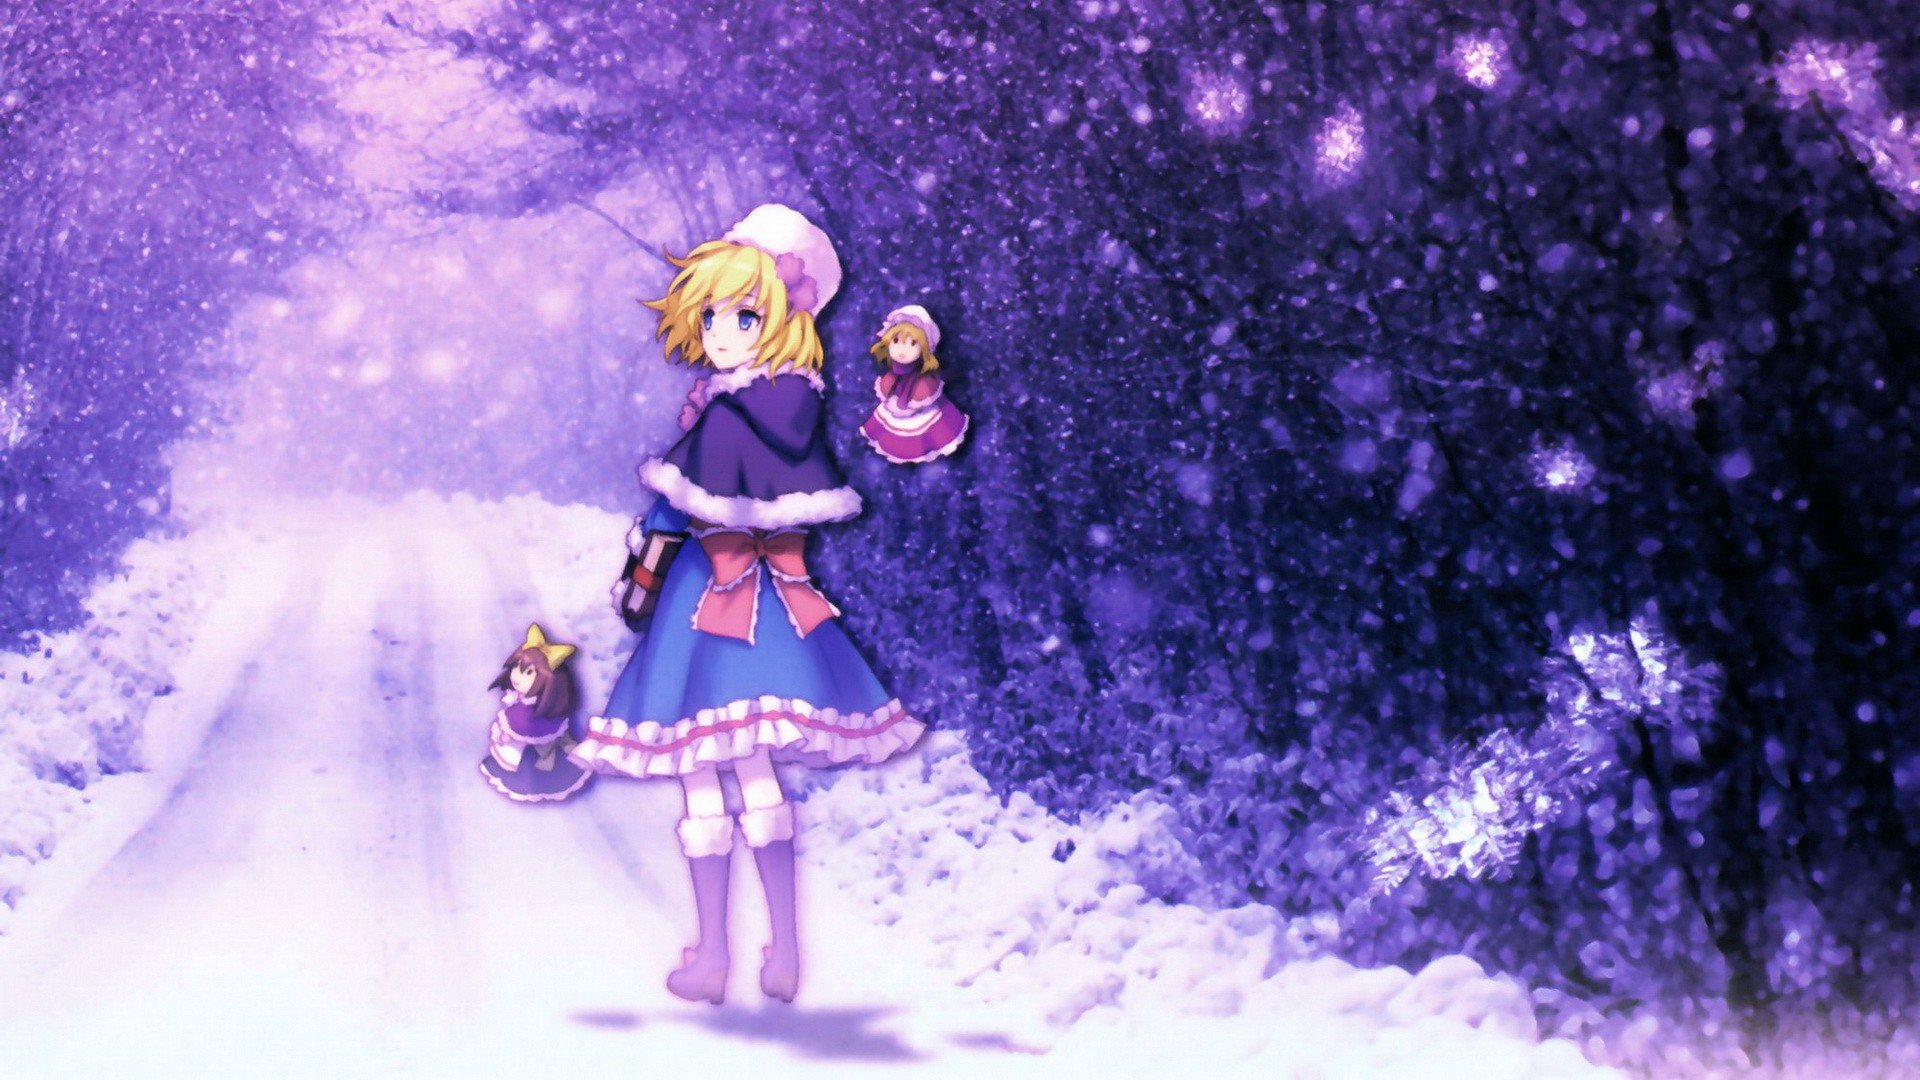 Touhou, Alice Margatroid, Video games, Anime girls, Short hair, Blonde, Bangs, Looking back, Blue eyes, Winter, Dress, Books, Blue dress, Boots, Snow, Road, Trees, Women outdoors Wallpaper